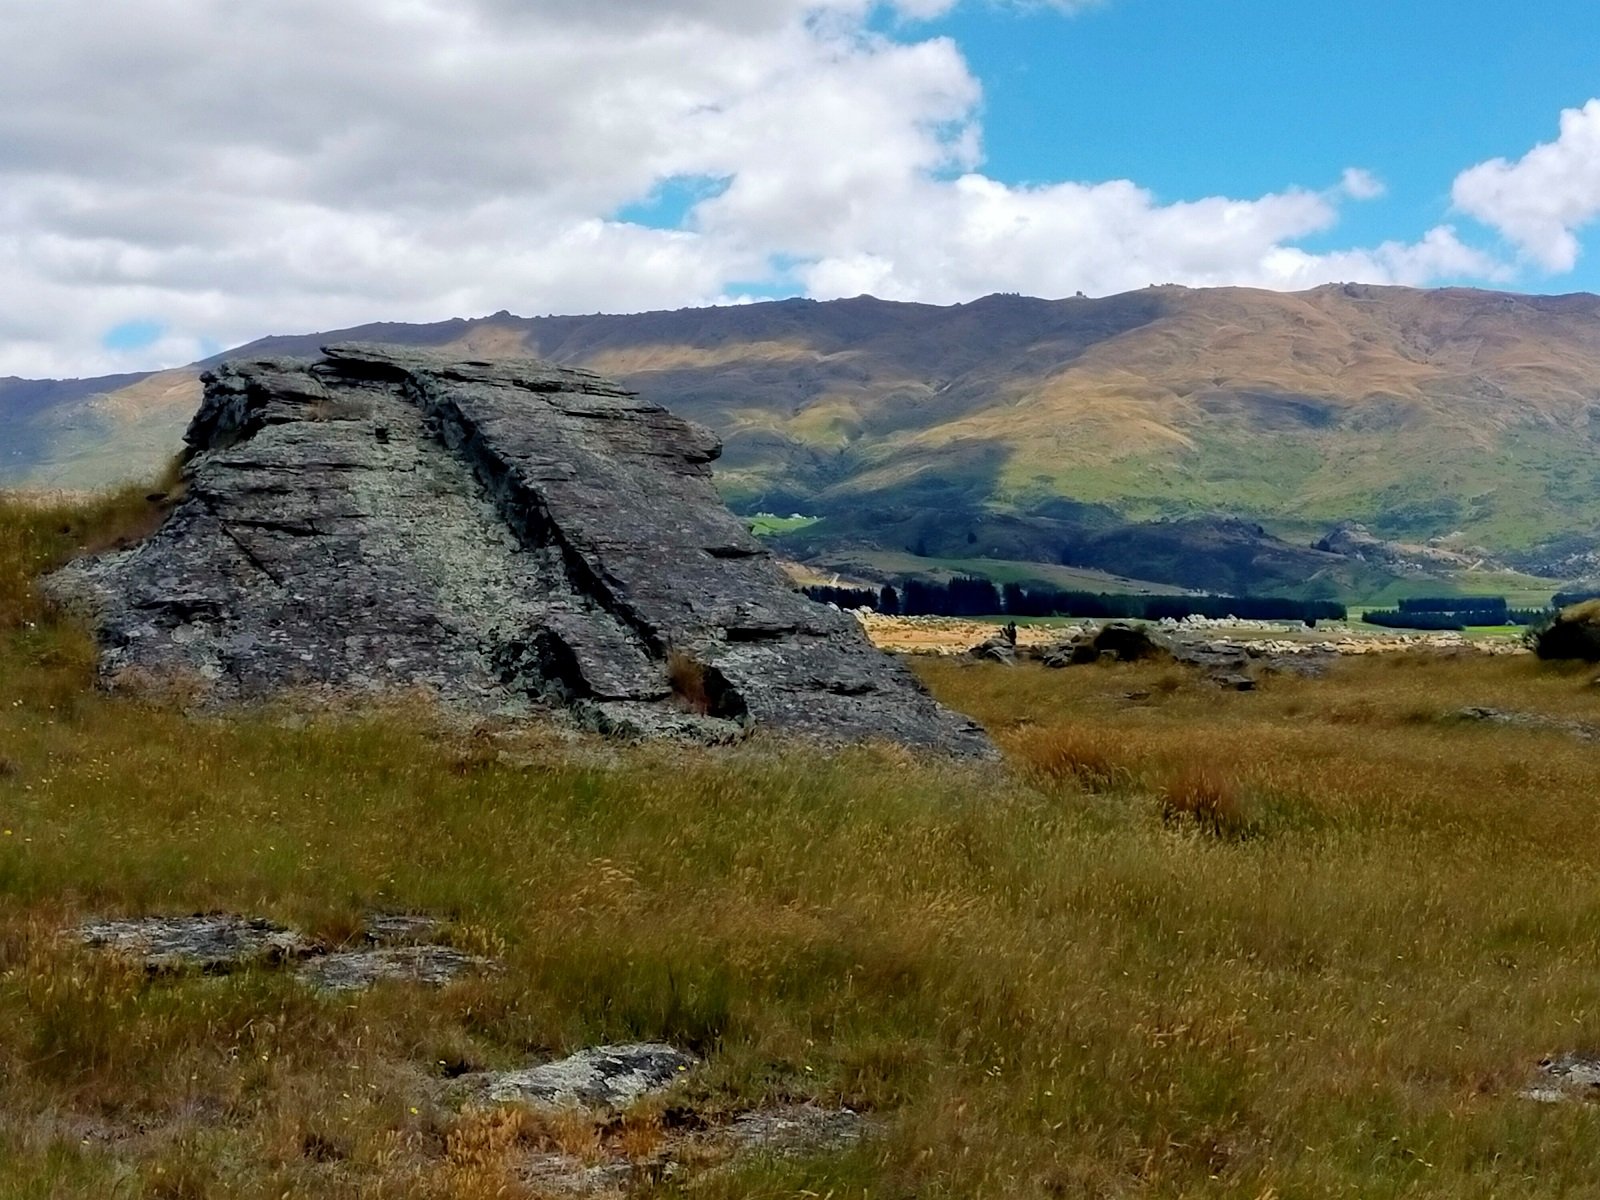  Looking towards the Rock and Pillar Range/Kopuwai. Image by: Suzanne Middleton 